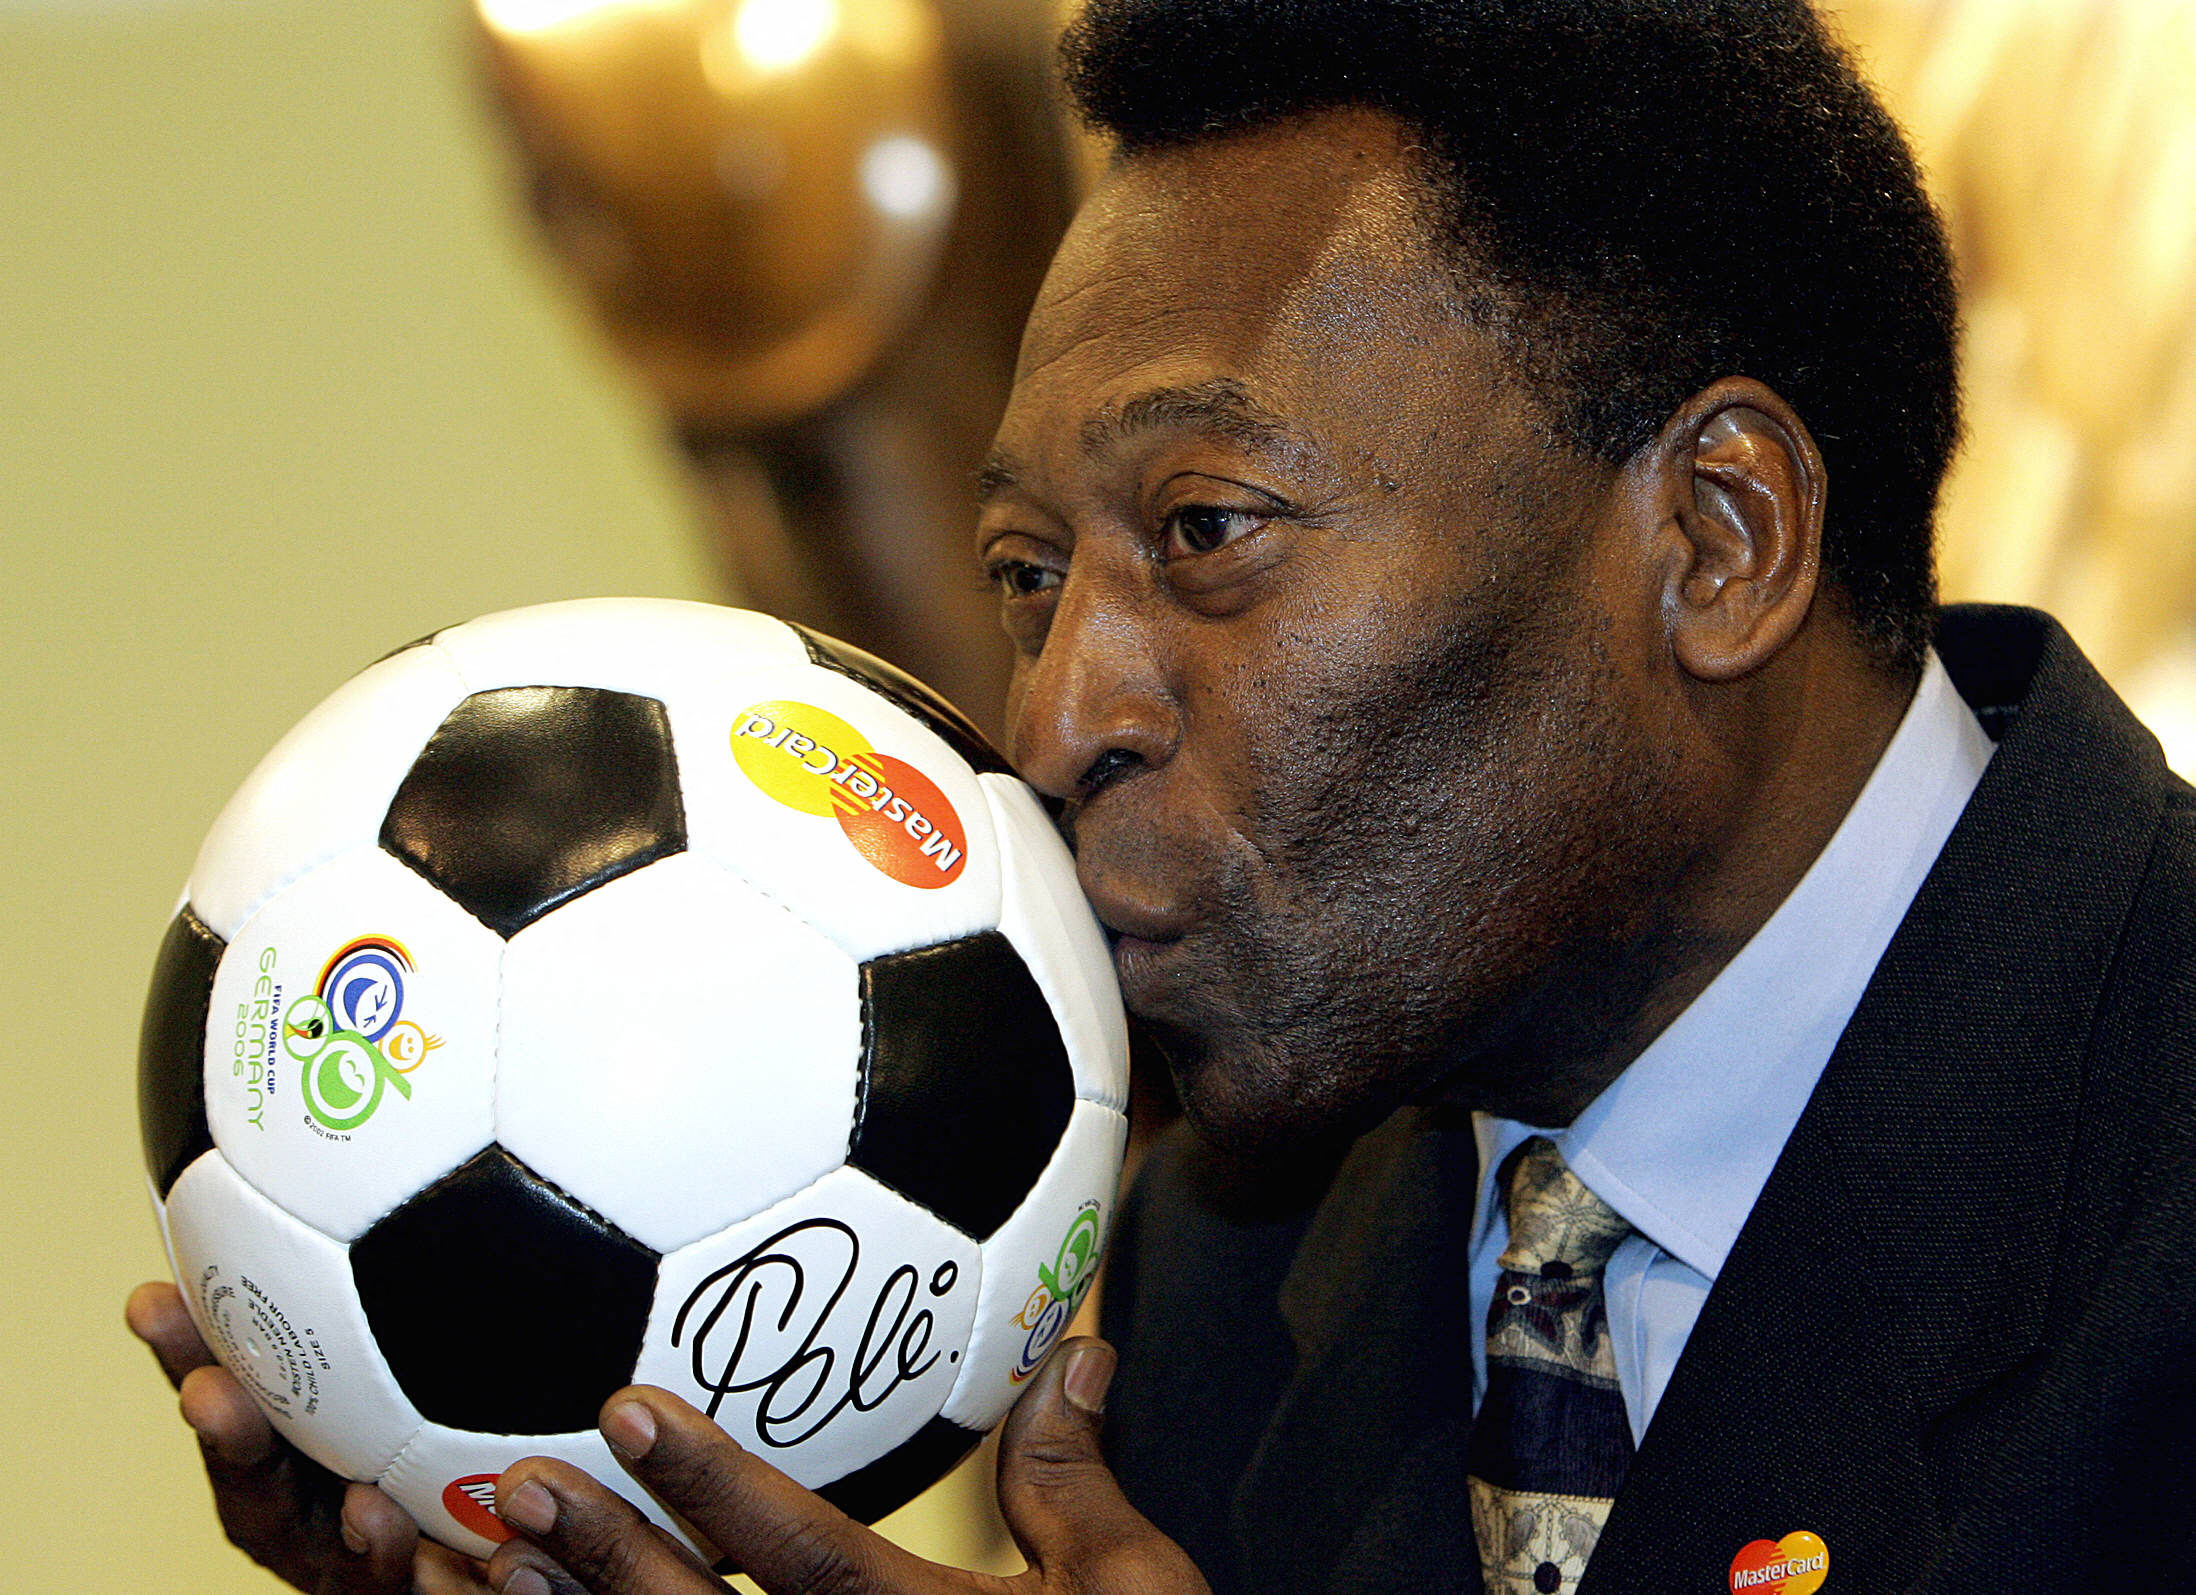 Family members visit the legendary Pele on December 24 at the Sao Paulo hospital where he is suffering from worsening cancer.